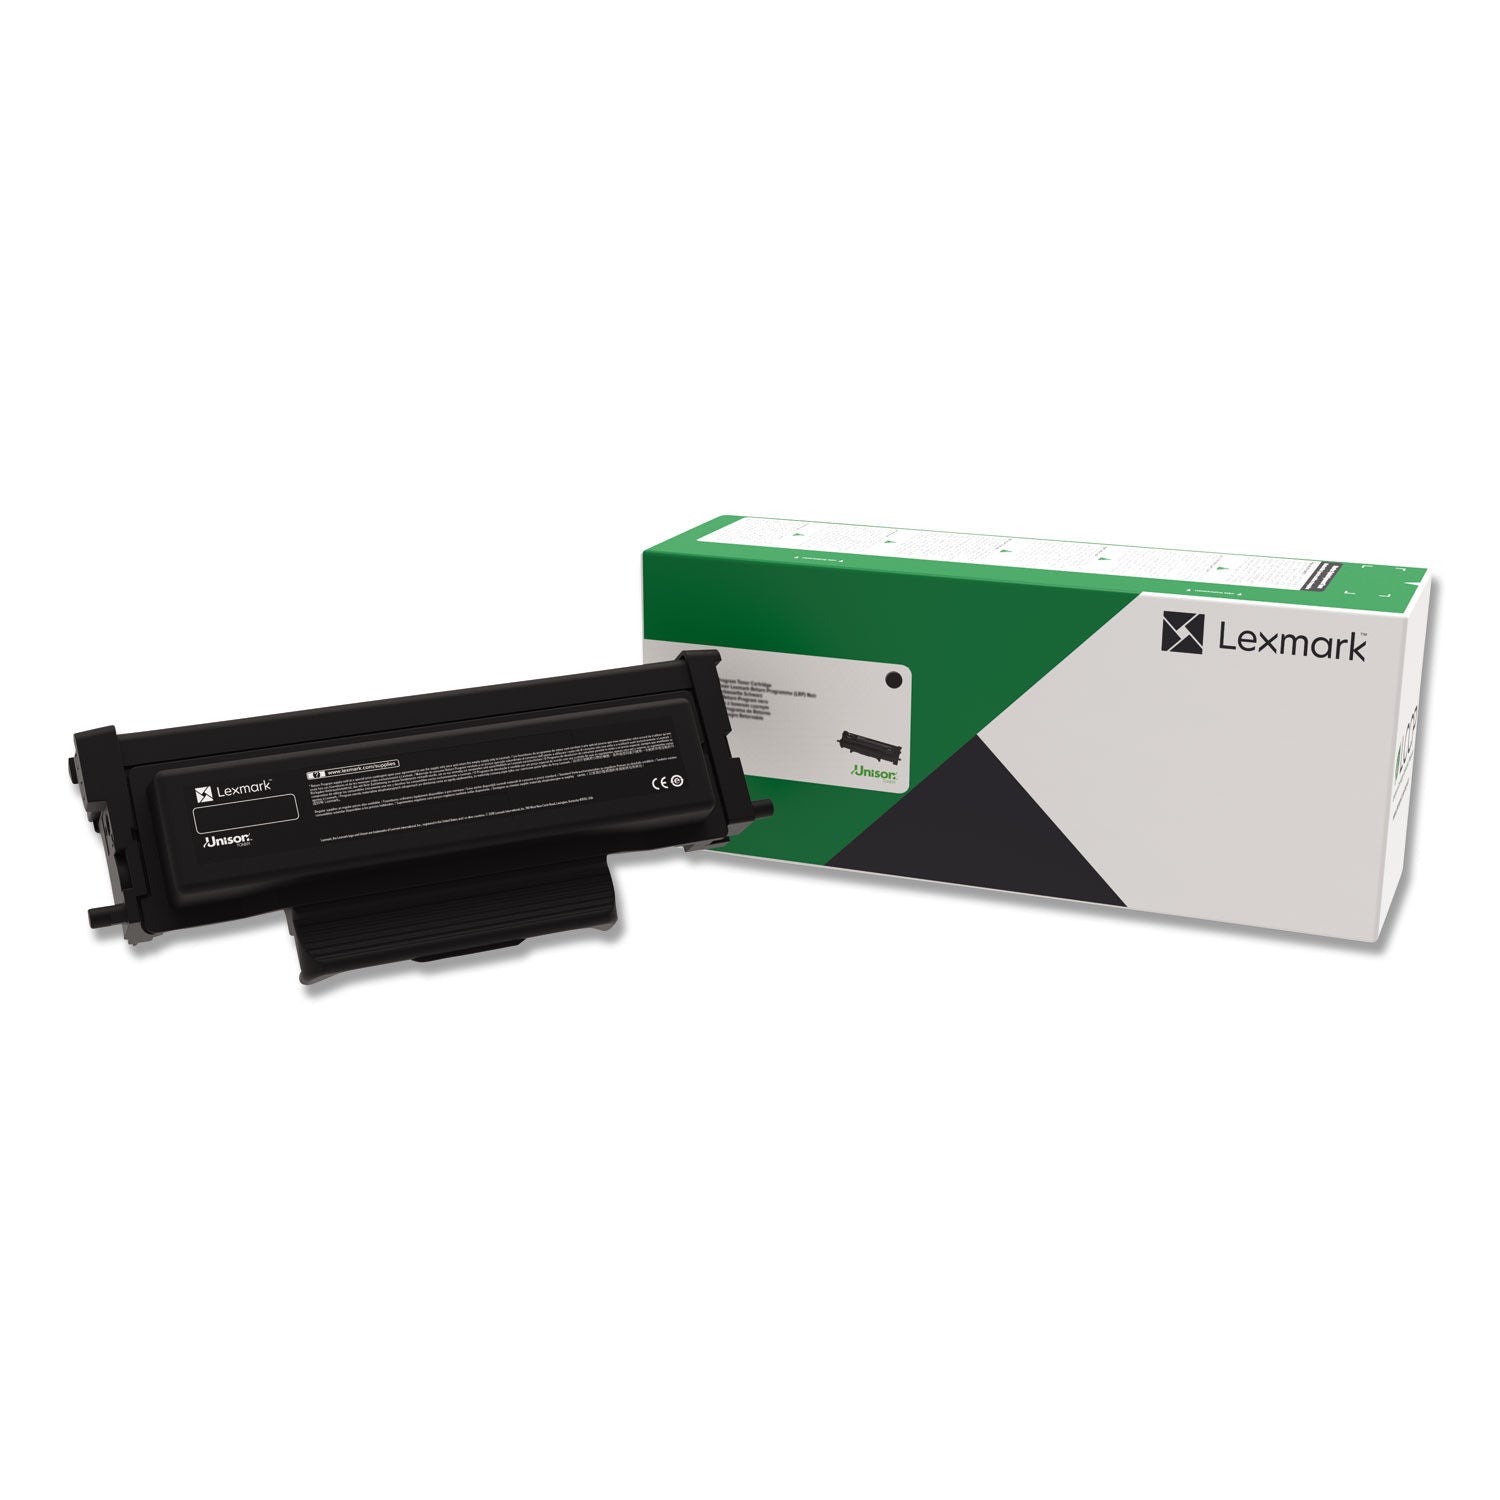 OEM Lexmark B221X00 Extra High Yield Toner Cartridge for B2236, MB2236 [6,000 Pages]